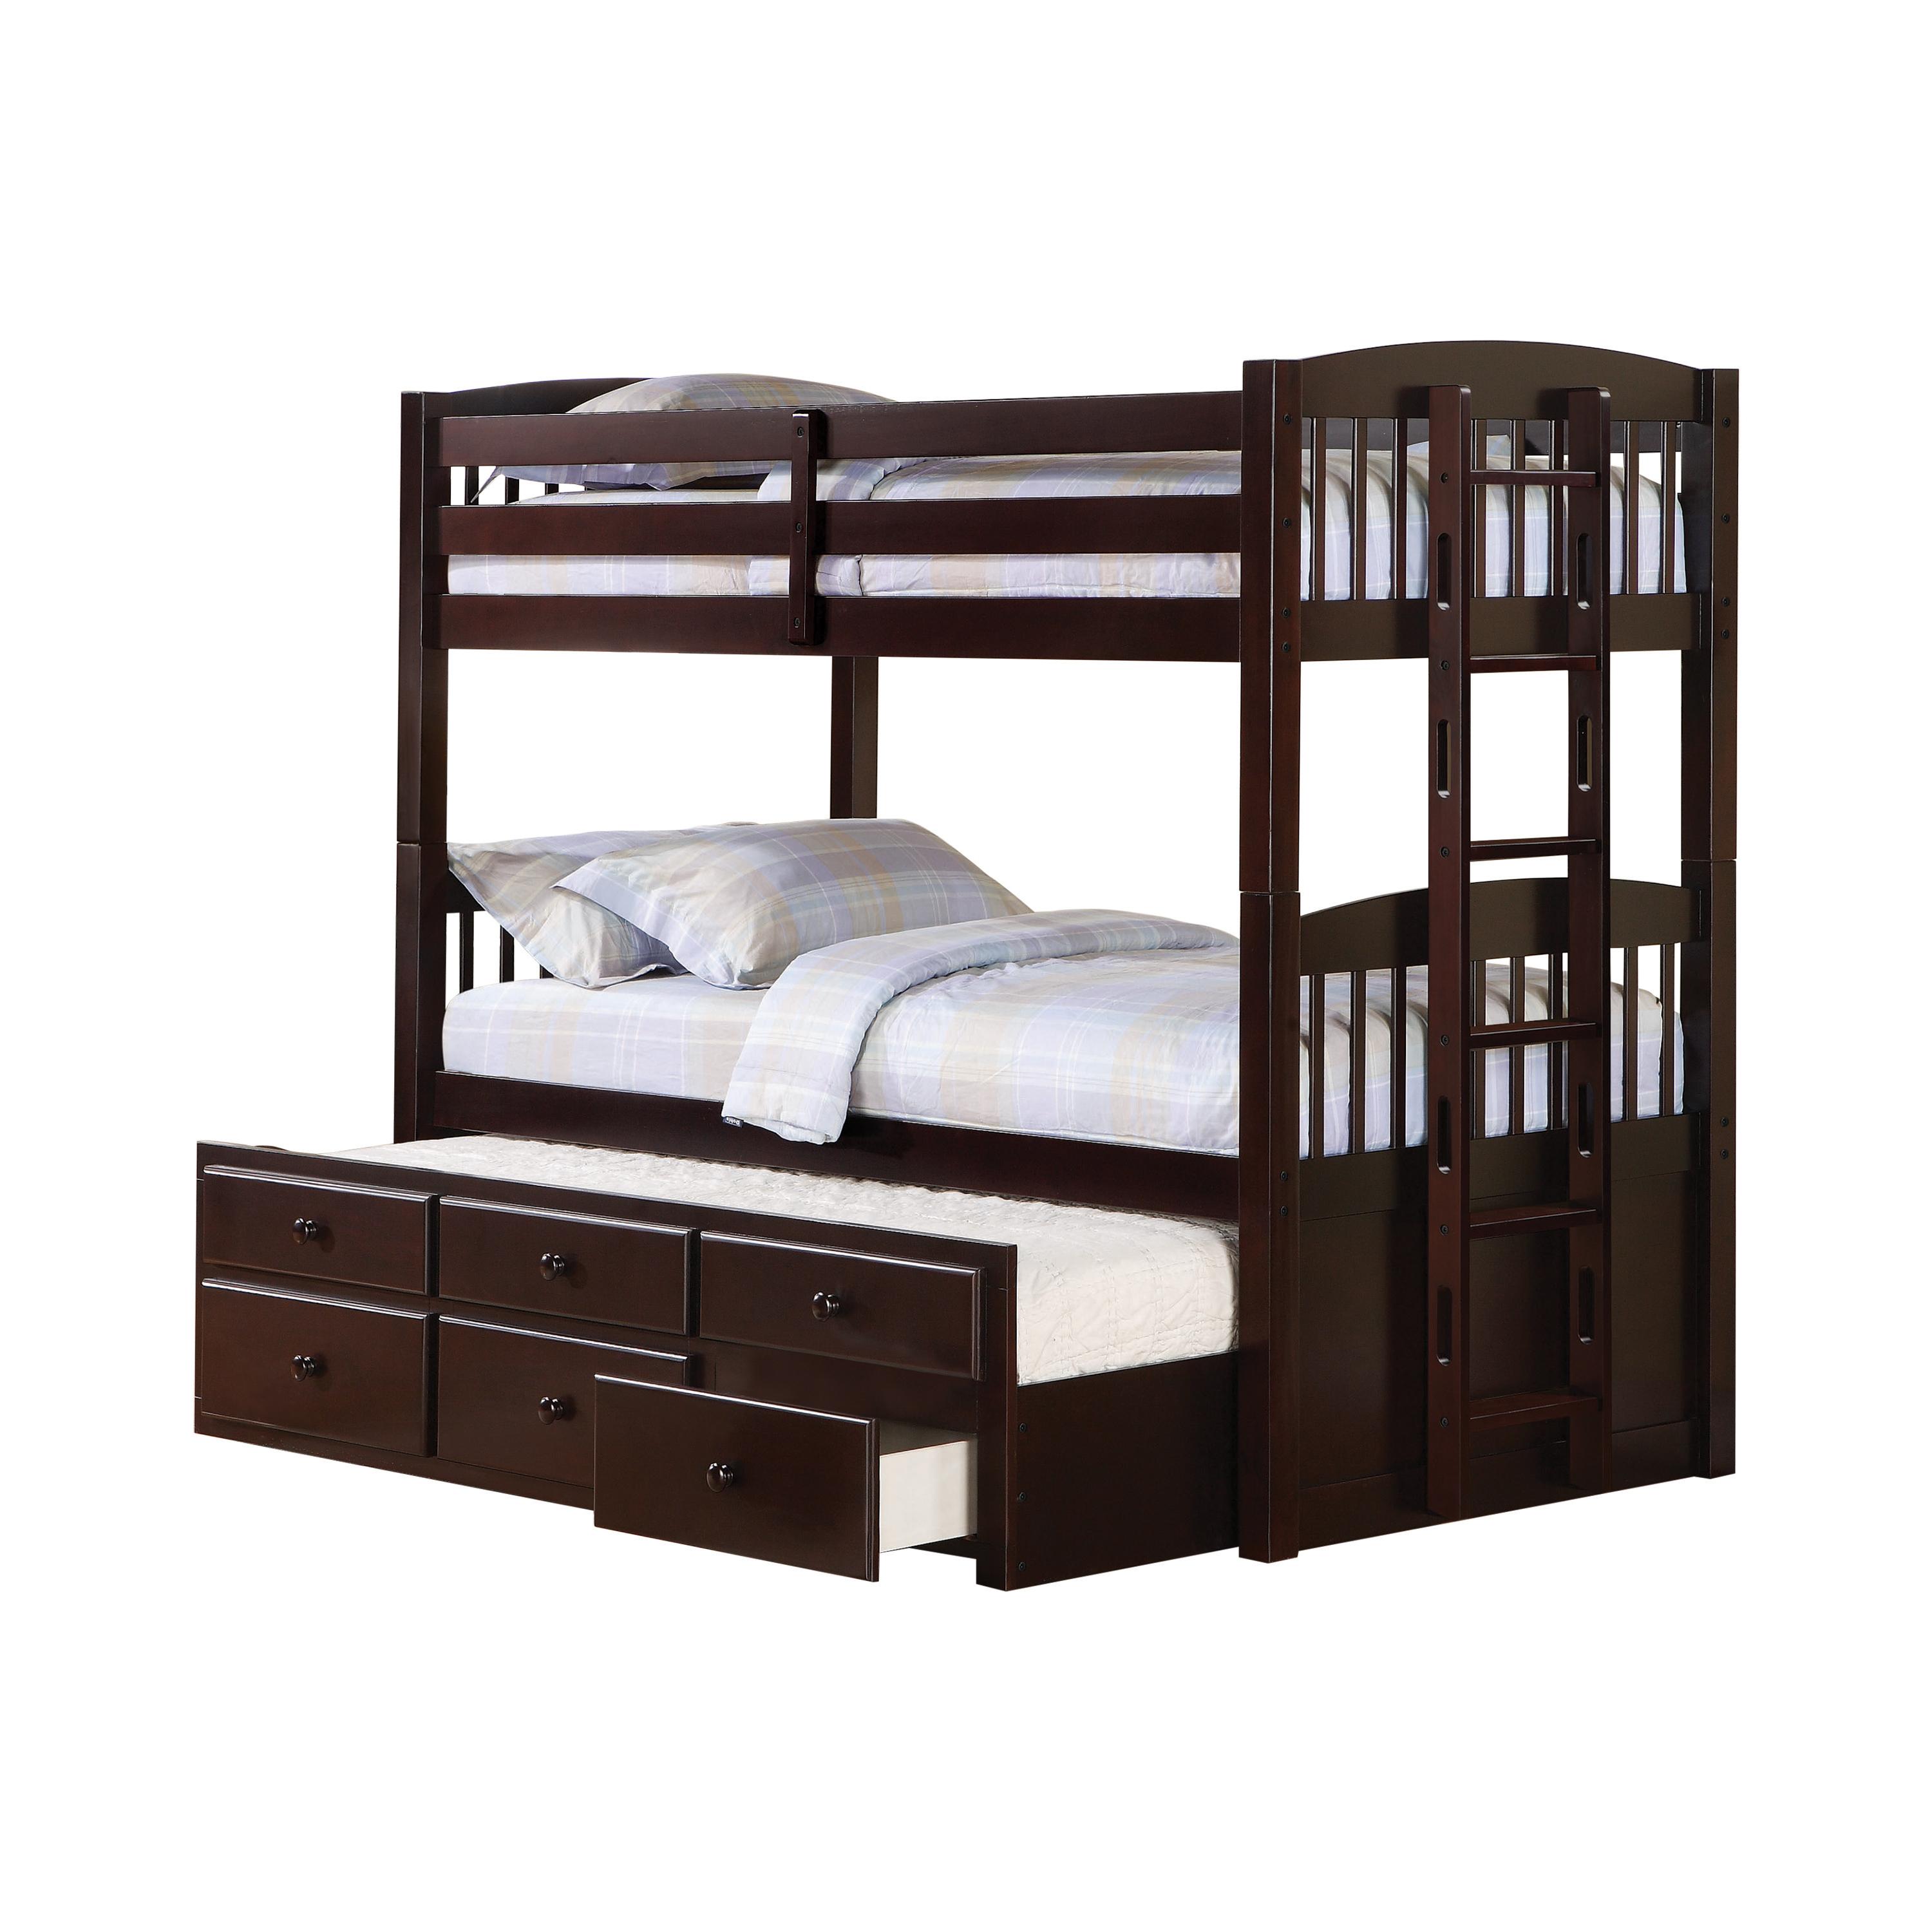 Transitional Bunk Bed w/Trundle 460071 Kensington 460071 in Cappuccino 